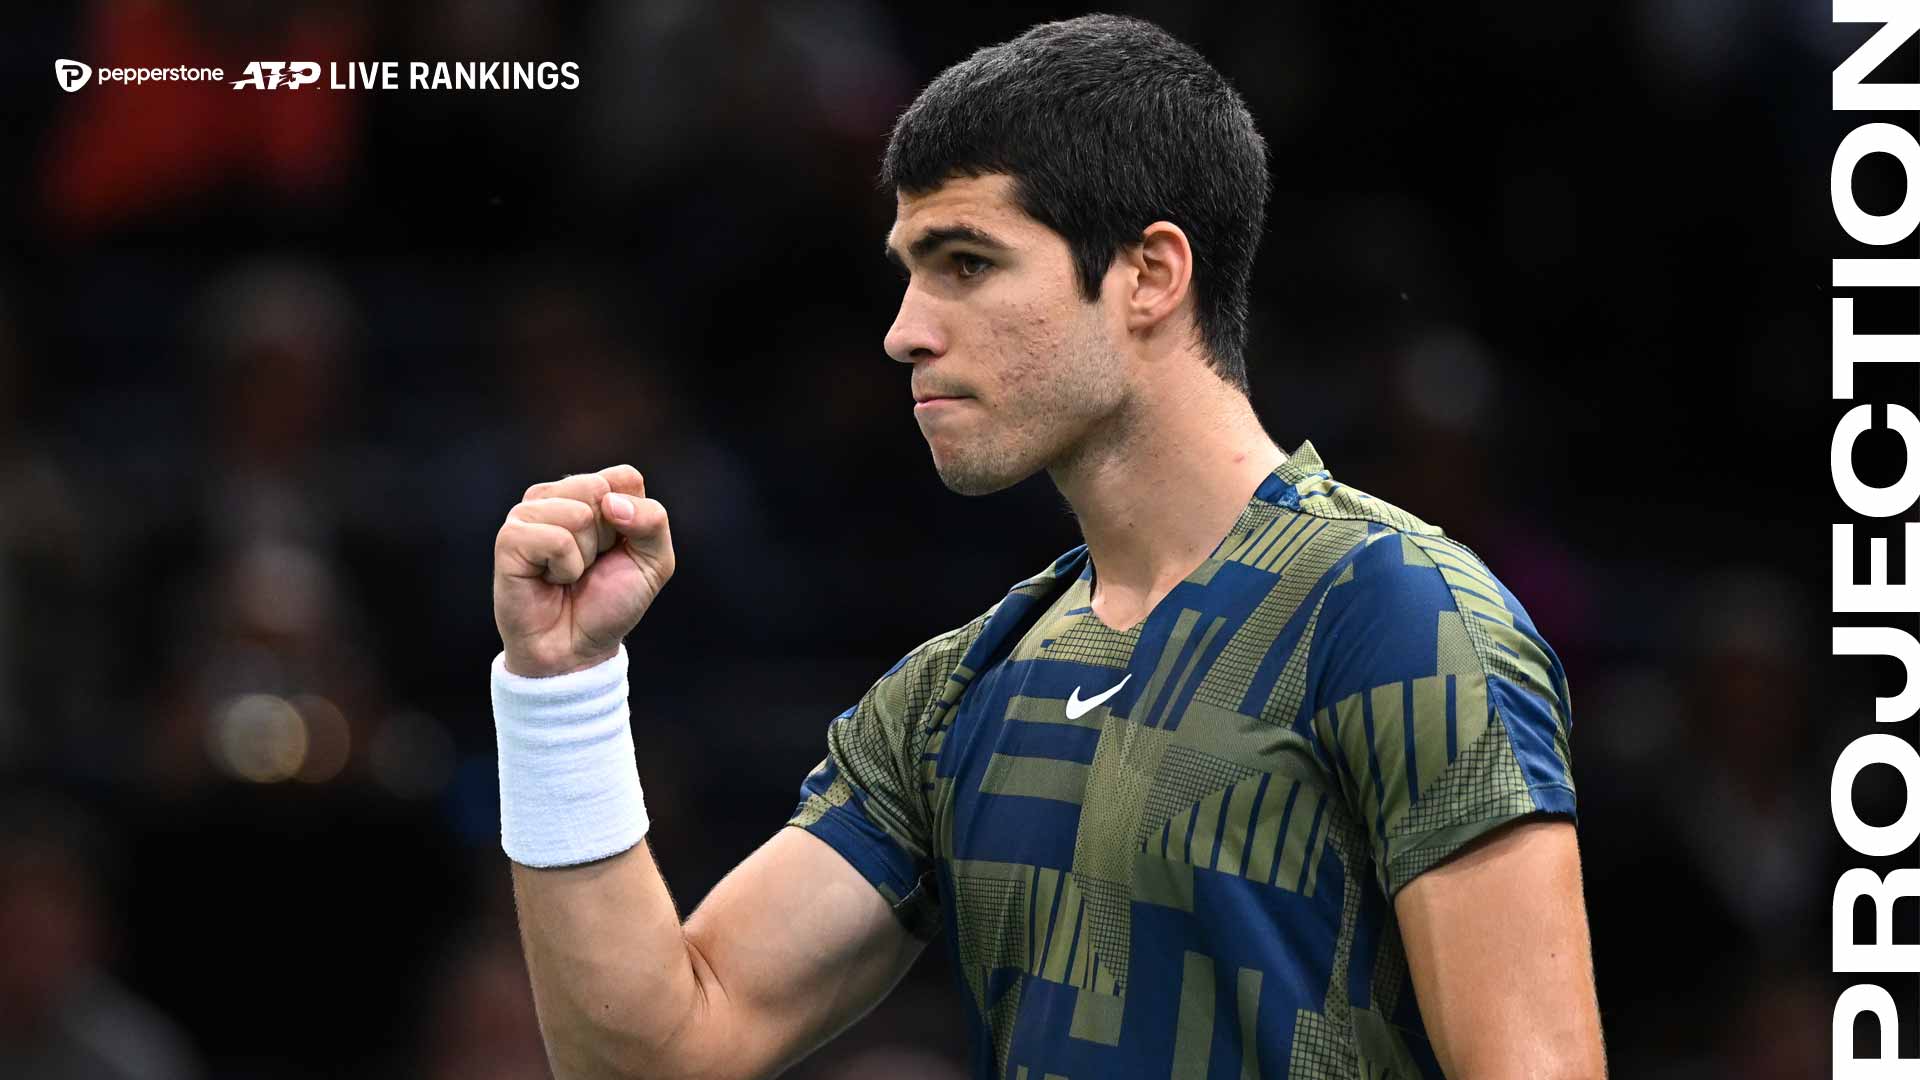 Alcaraz Can Tie Djokovic On Points This Week; Who Would Be World No